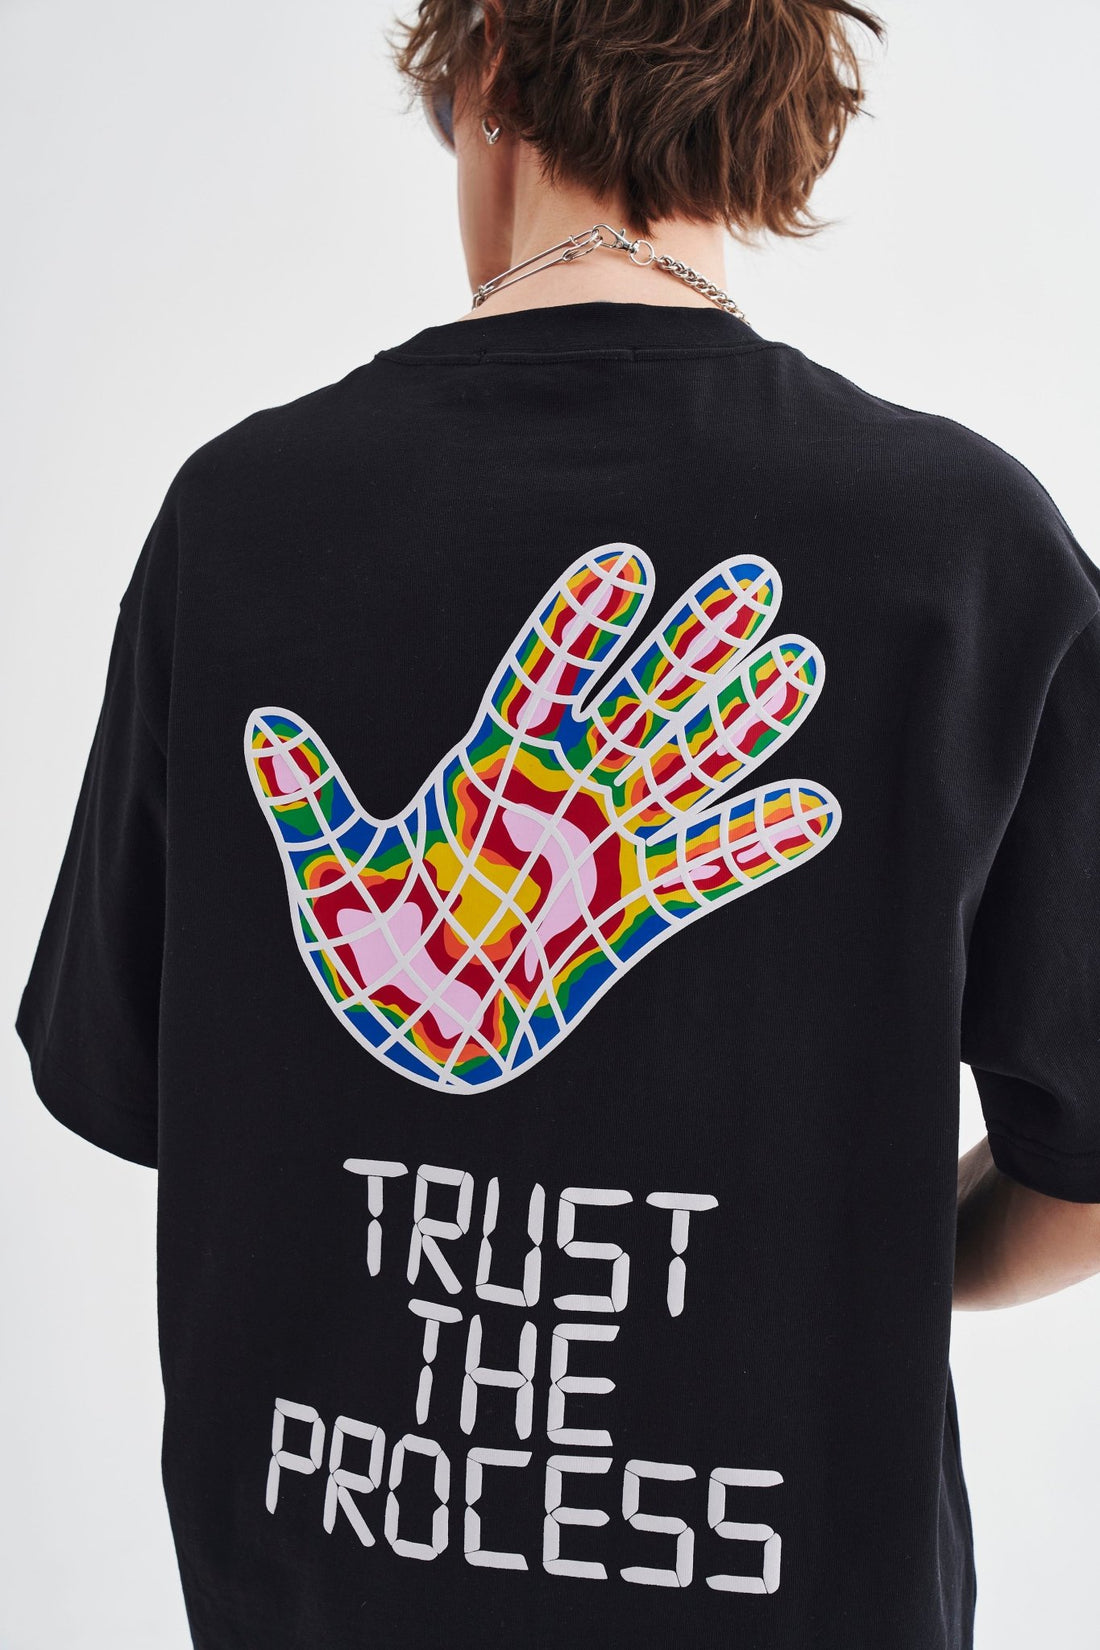 TRUST THE PROCESS T-SHIRT BLACK Acupuncture